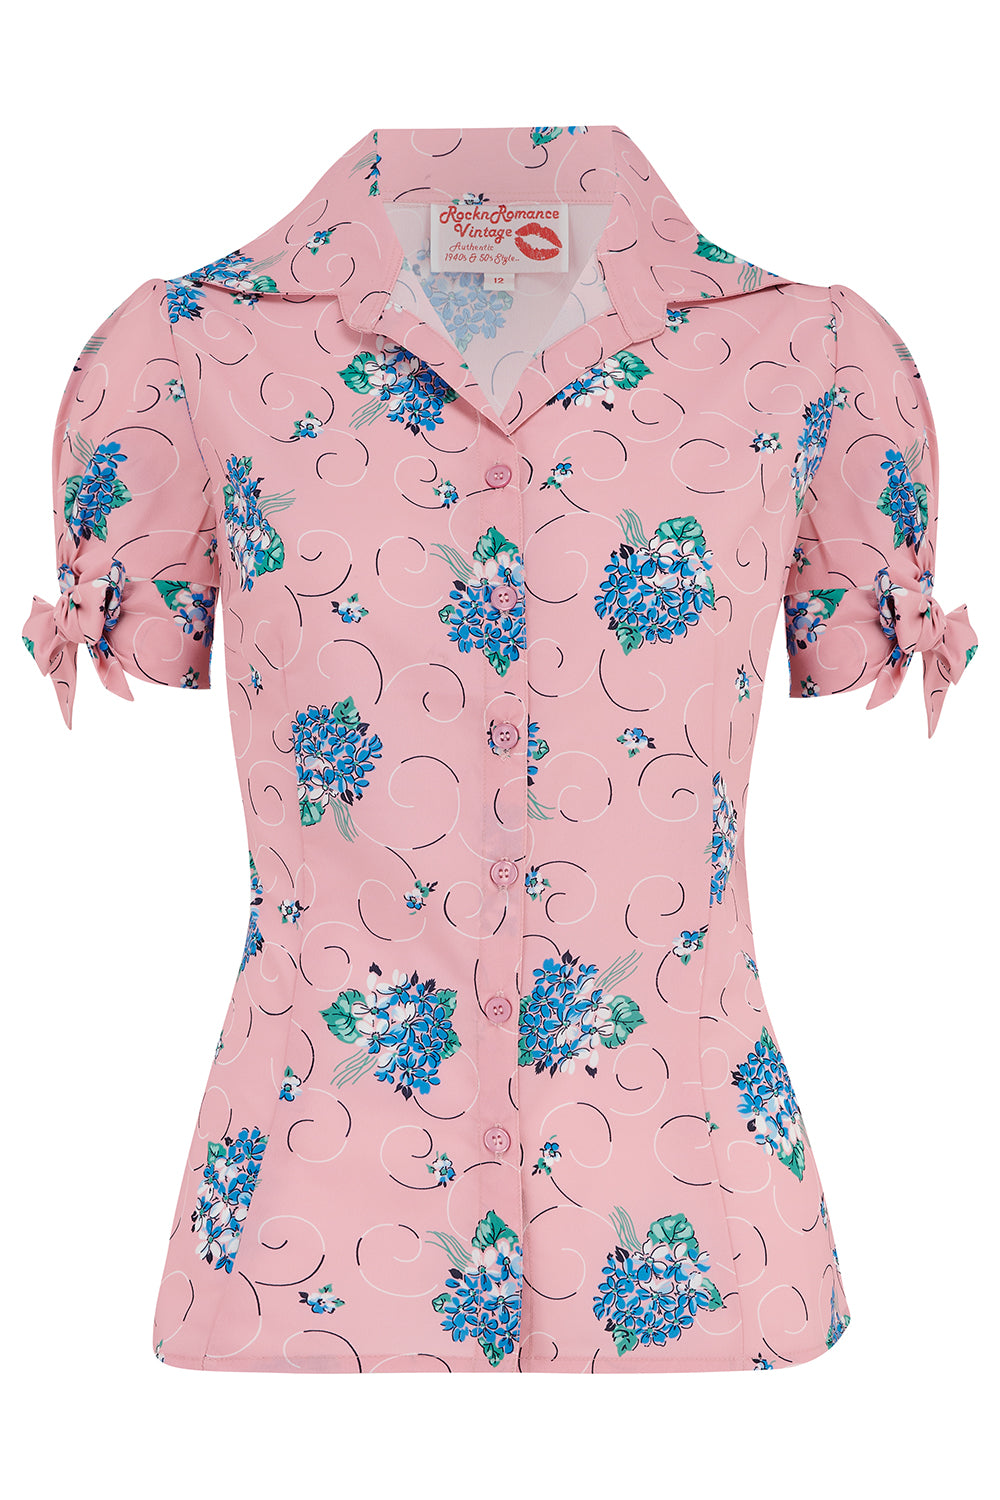 **Sample Sale** The "Jane" Blouse in Pink Summer Bouquet, True & Authentic 1950s Vintage Style